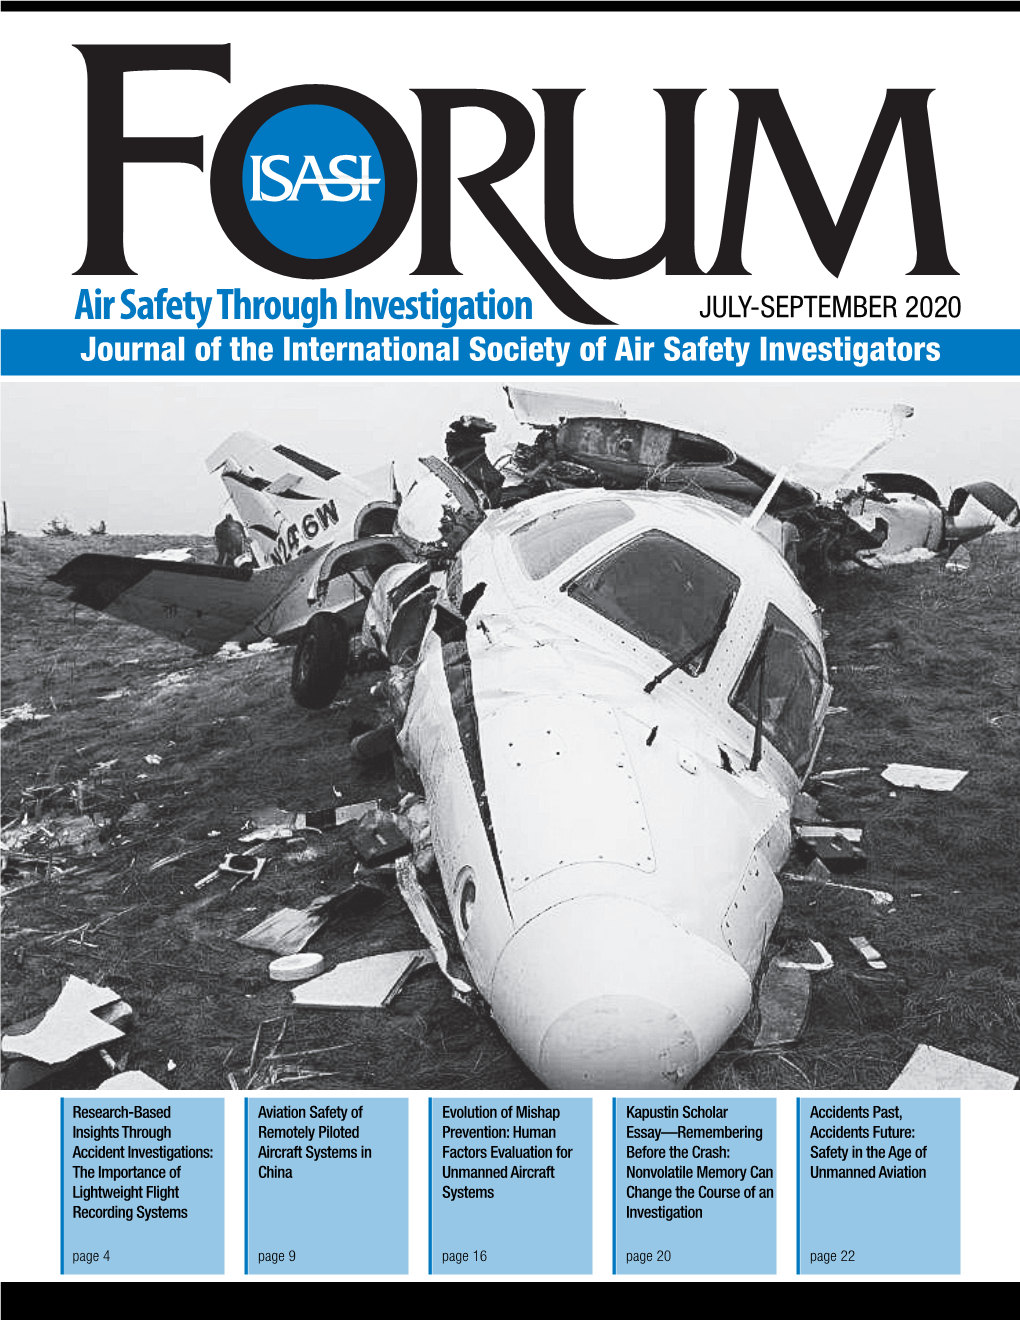 Air Safety Through Investigation JULY-SEPTEMBER 2020 Journal of the International Society of Air Safety Investigators